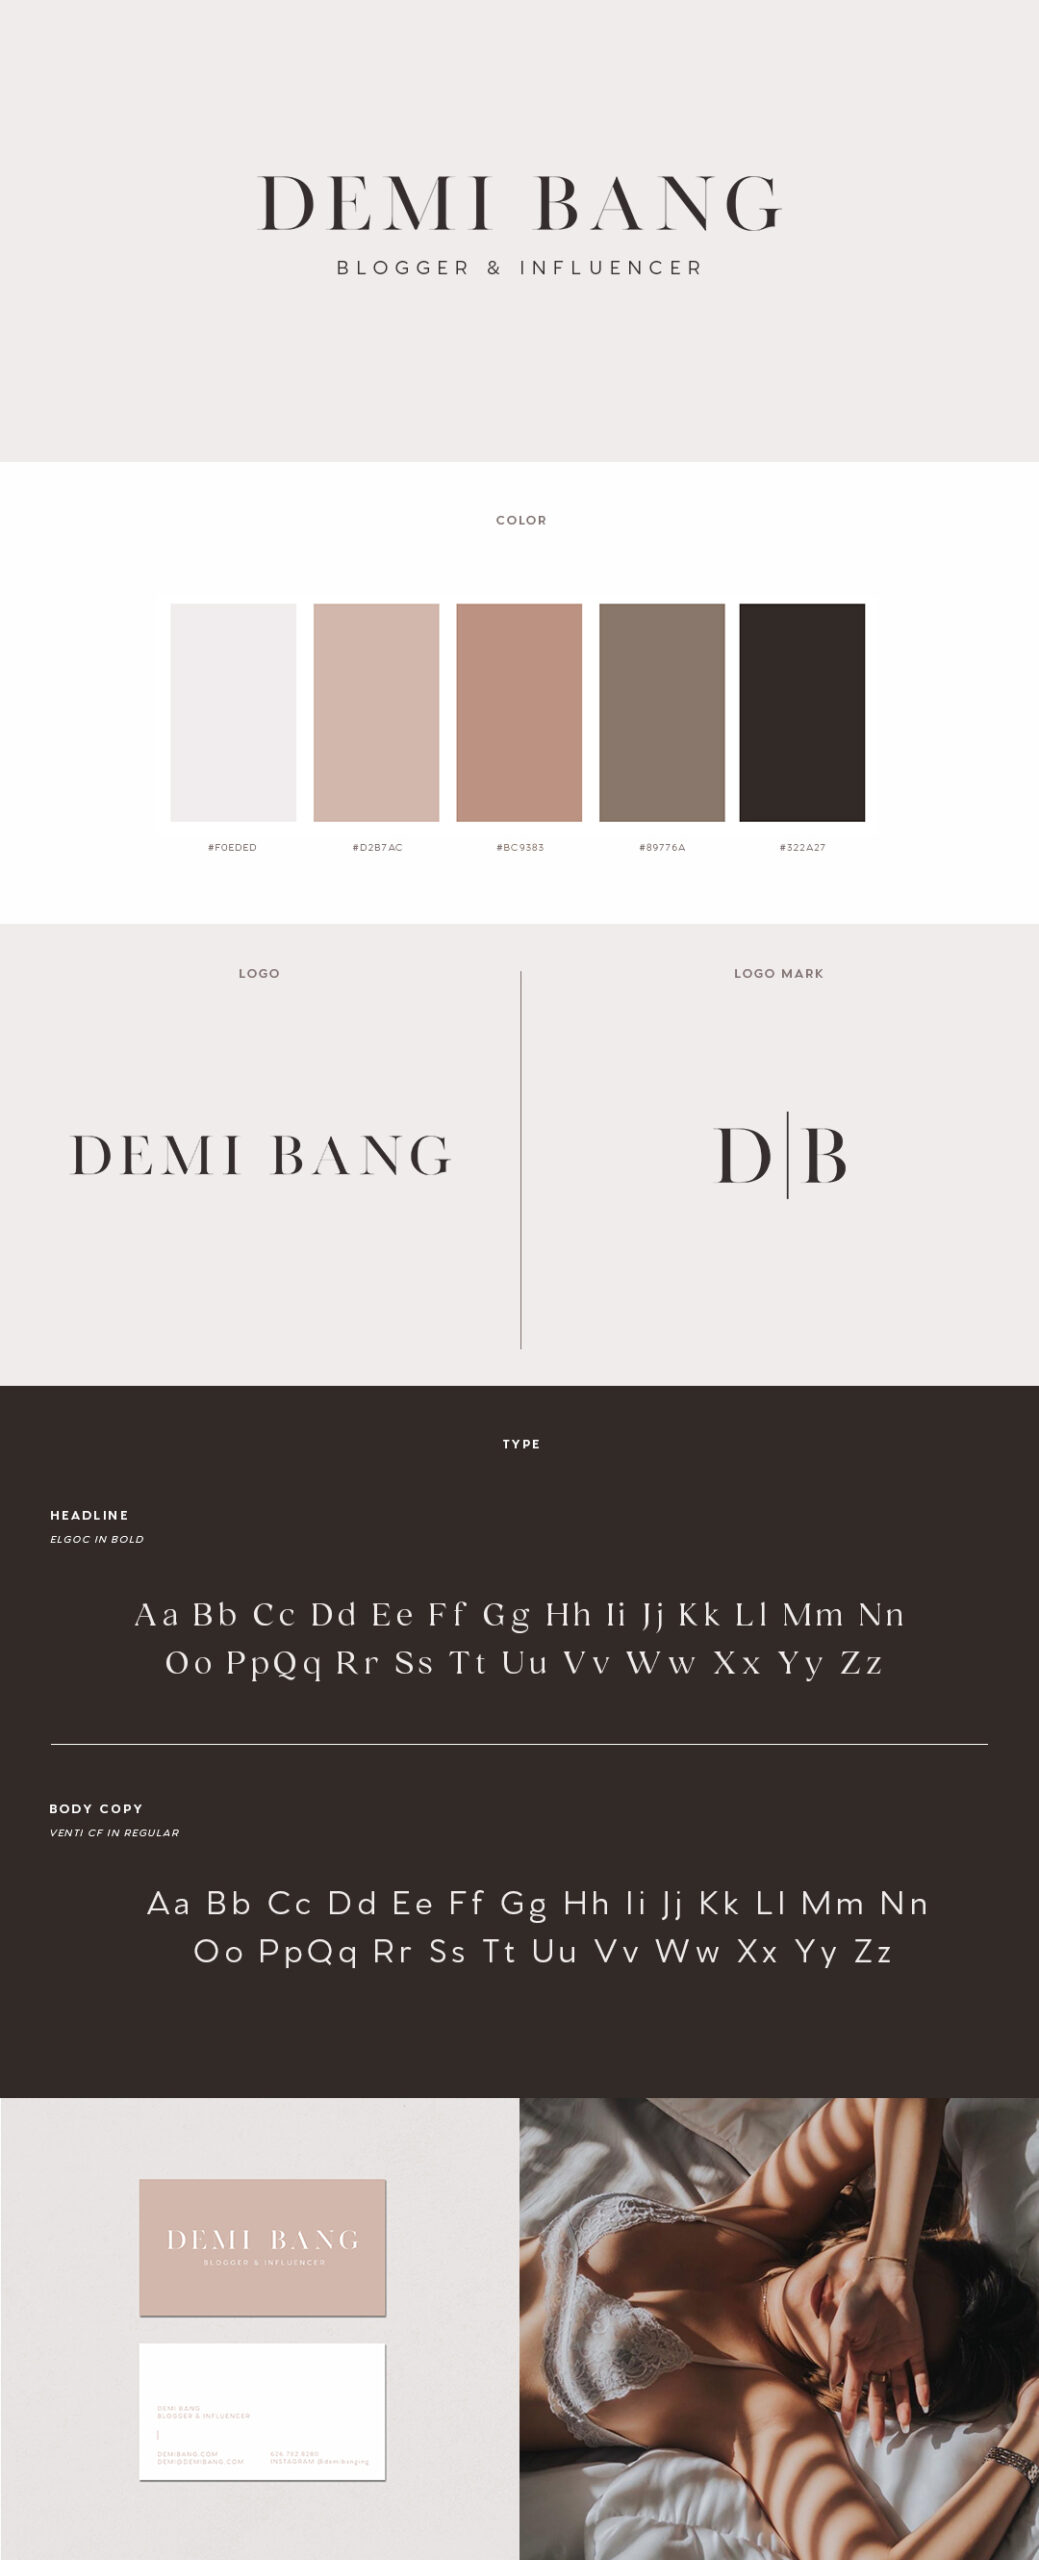 Demi Bang's personal rebranding, Brand Guides by Rouse Creative.